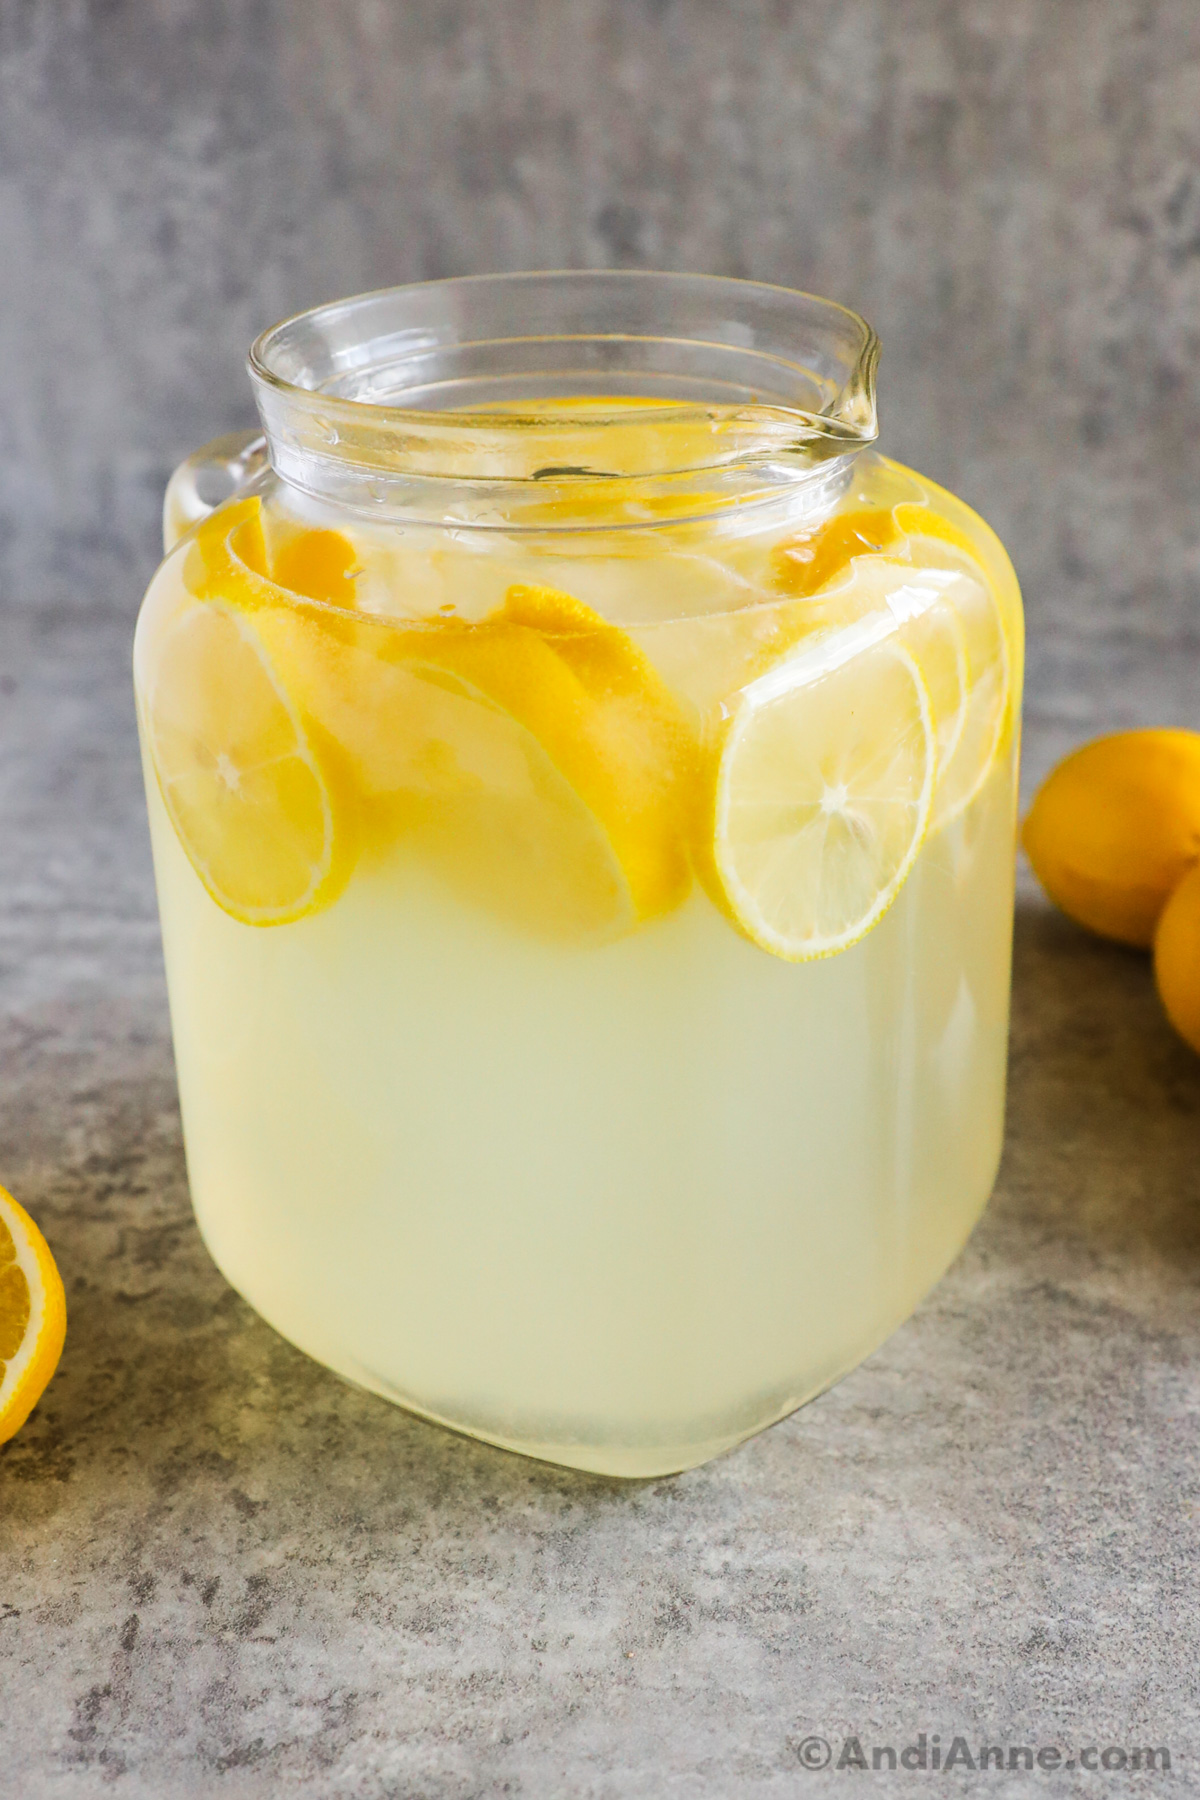 closeup of a full glass pitcher of lemonade with sliced lemons inside. whole and sliced lemons sit in background